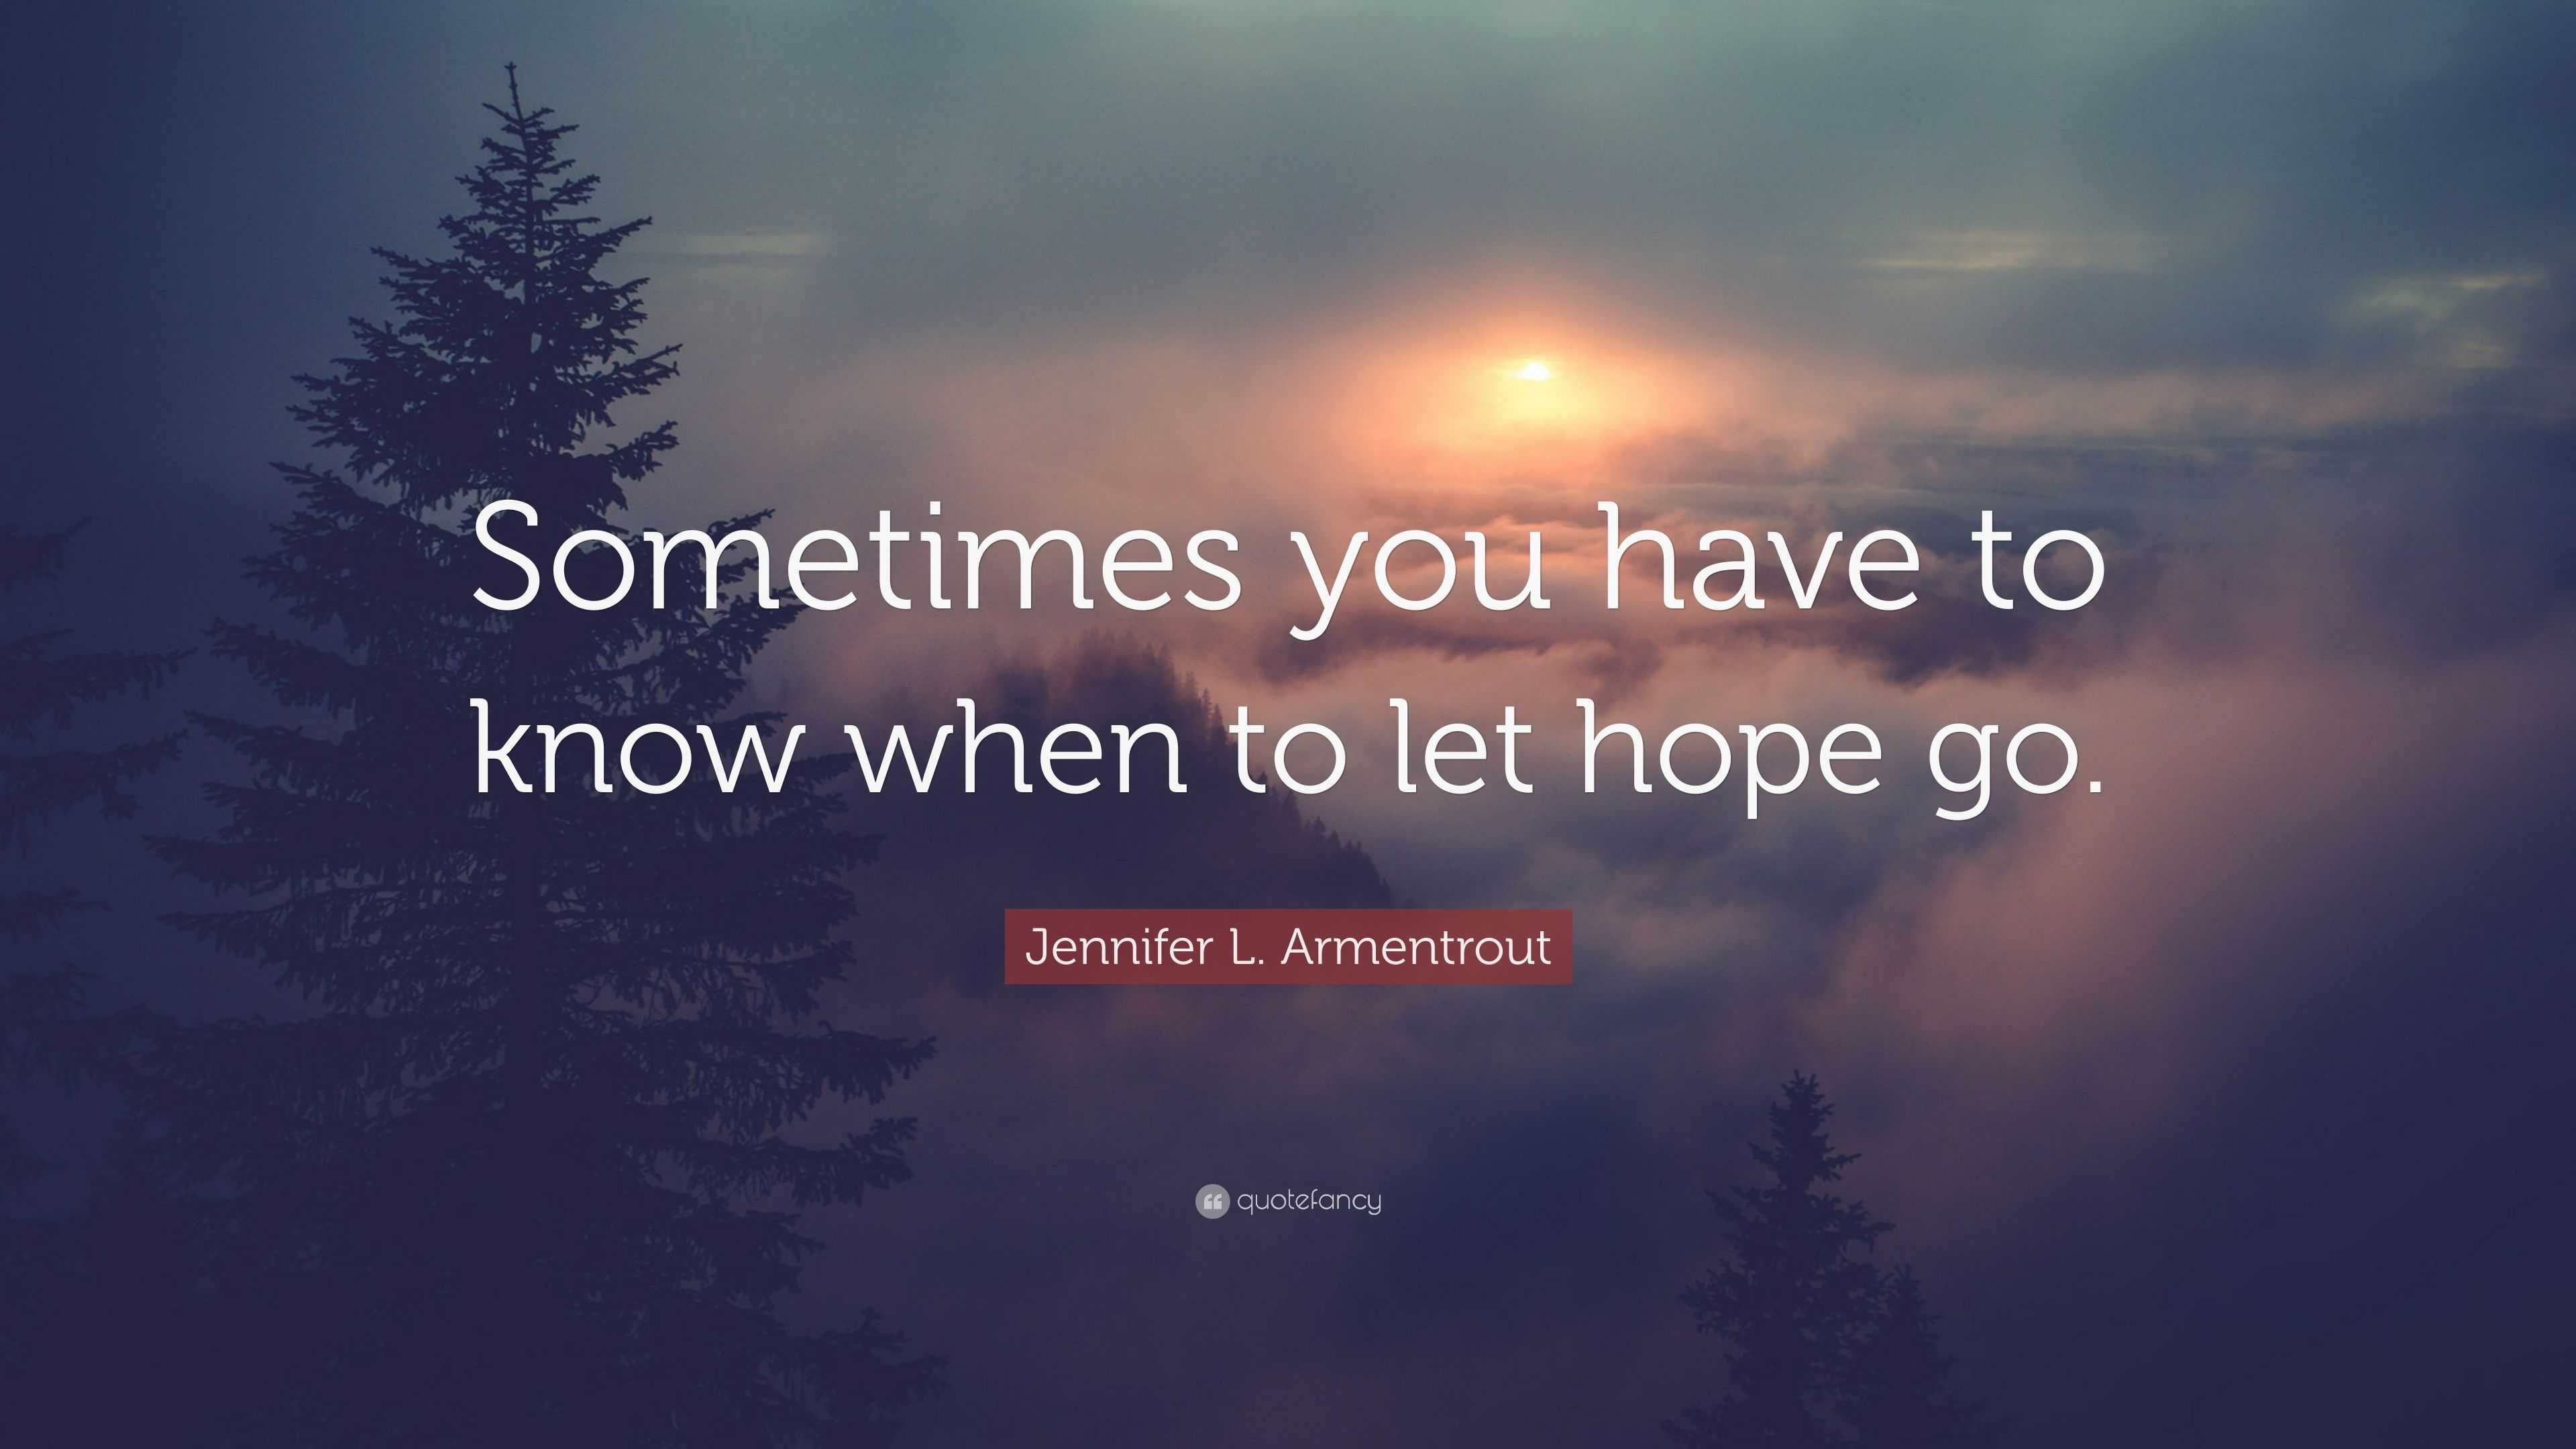 Jennifer L. Armentrout Quote: “Sometimes you have to know when to let ...